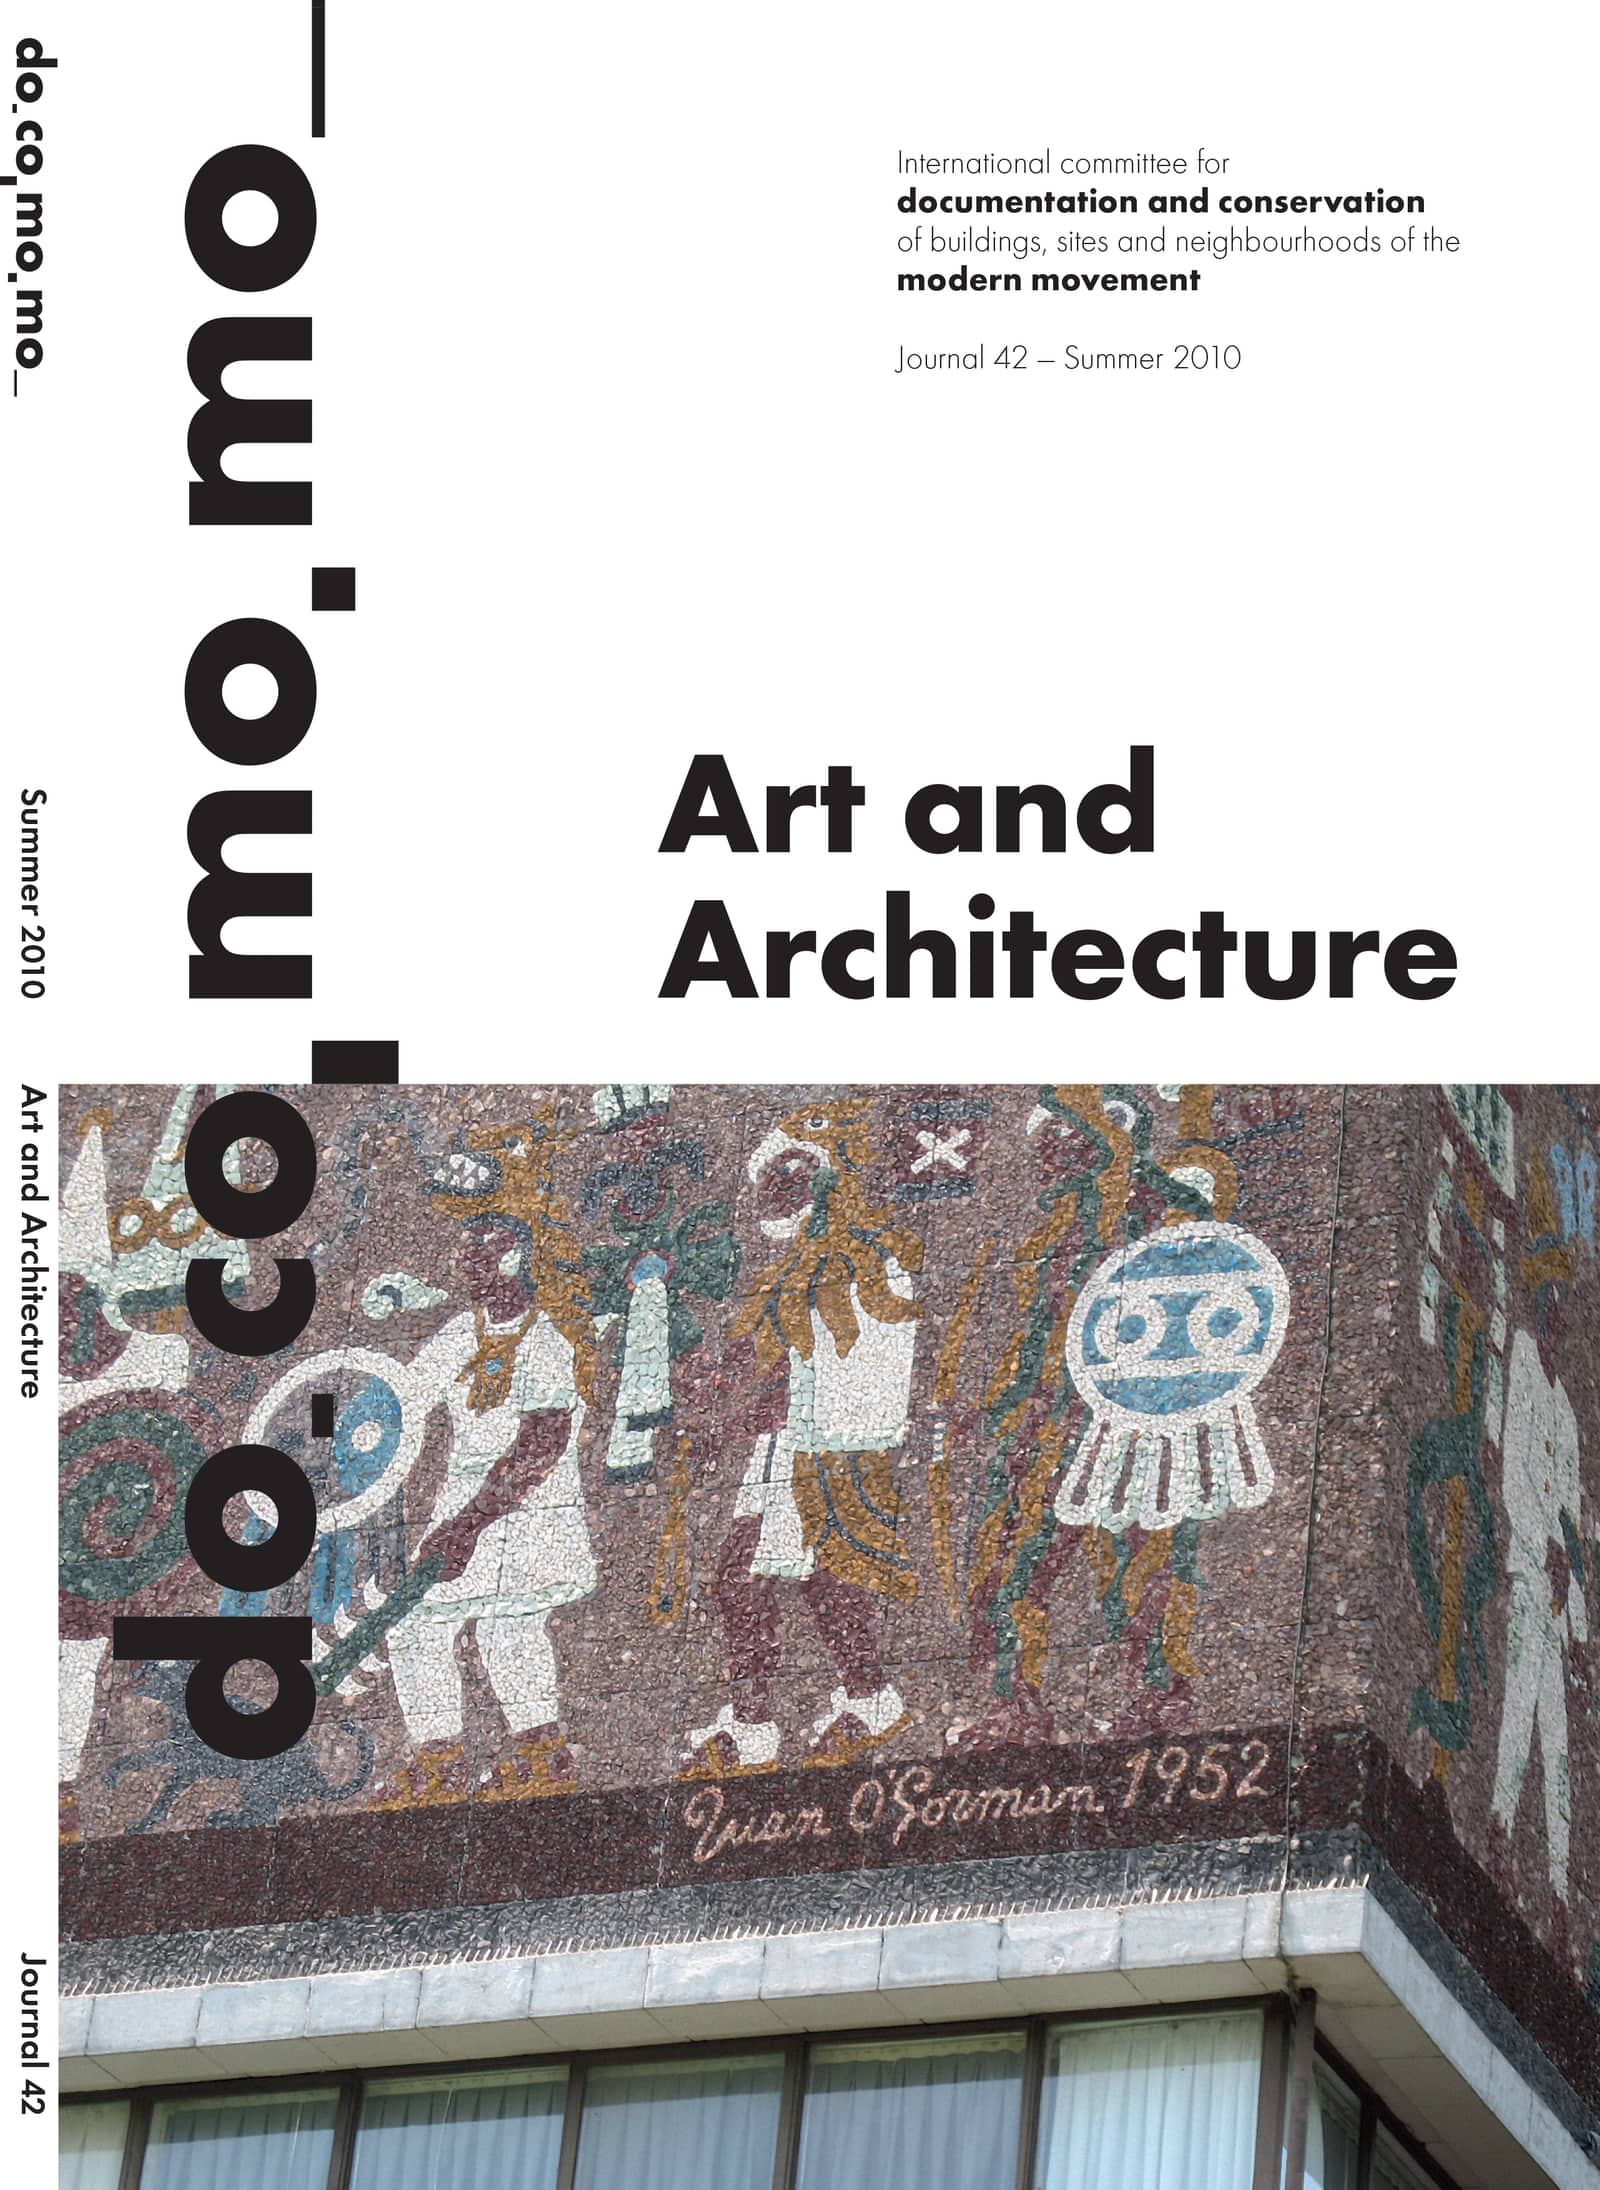 						View No. 42 (2010): Art and Architecture
					